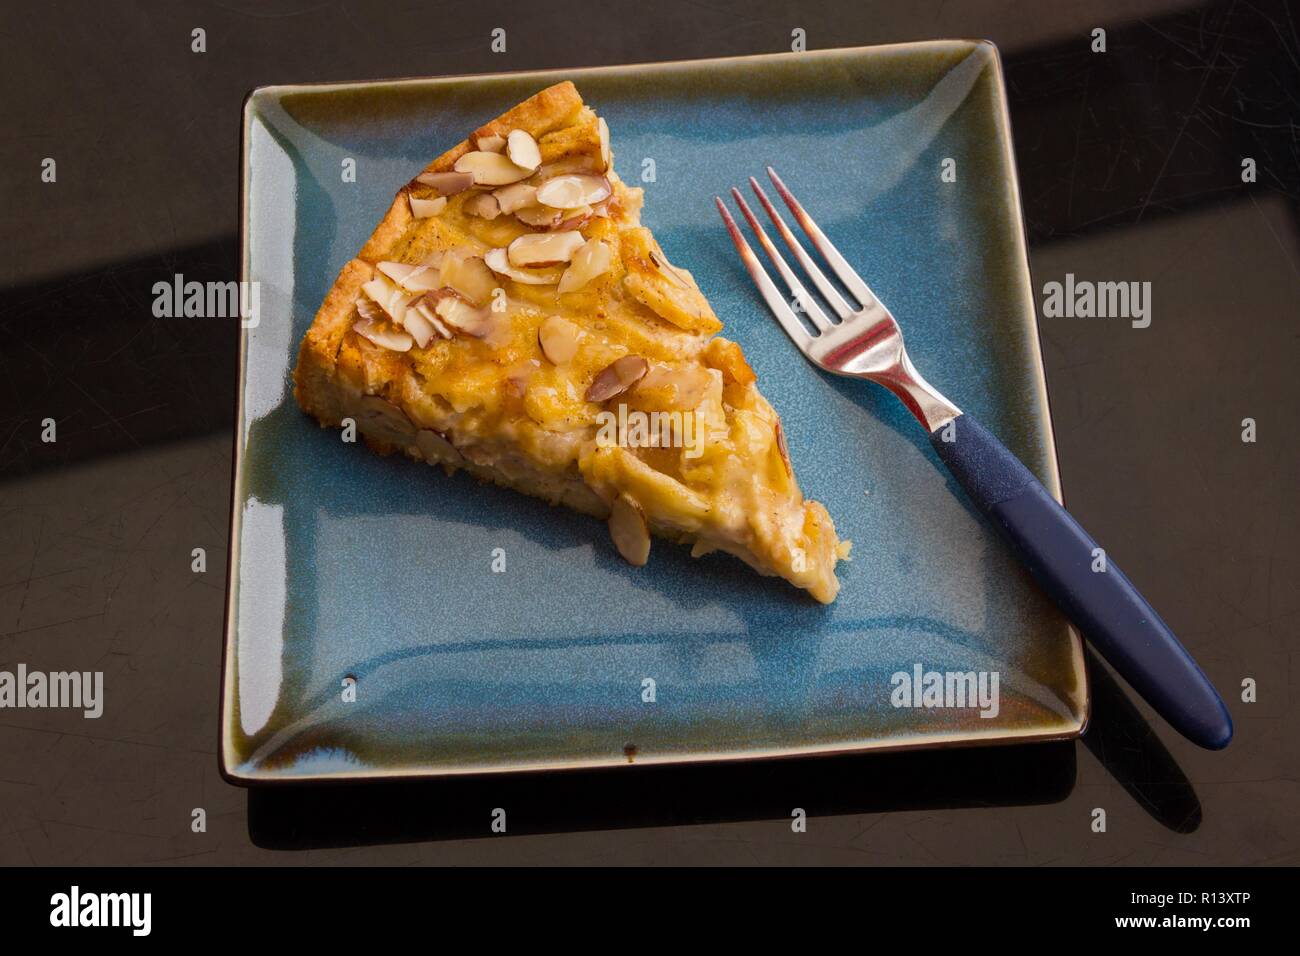 Top view of tasty apple almond kuchen cake and fork on blue square plate. Restaurant delicatessen dessert concept Stock Photo